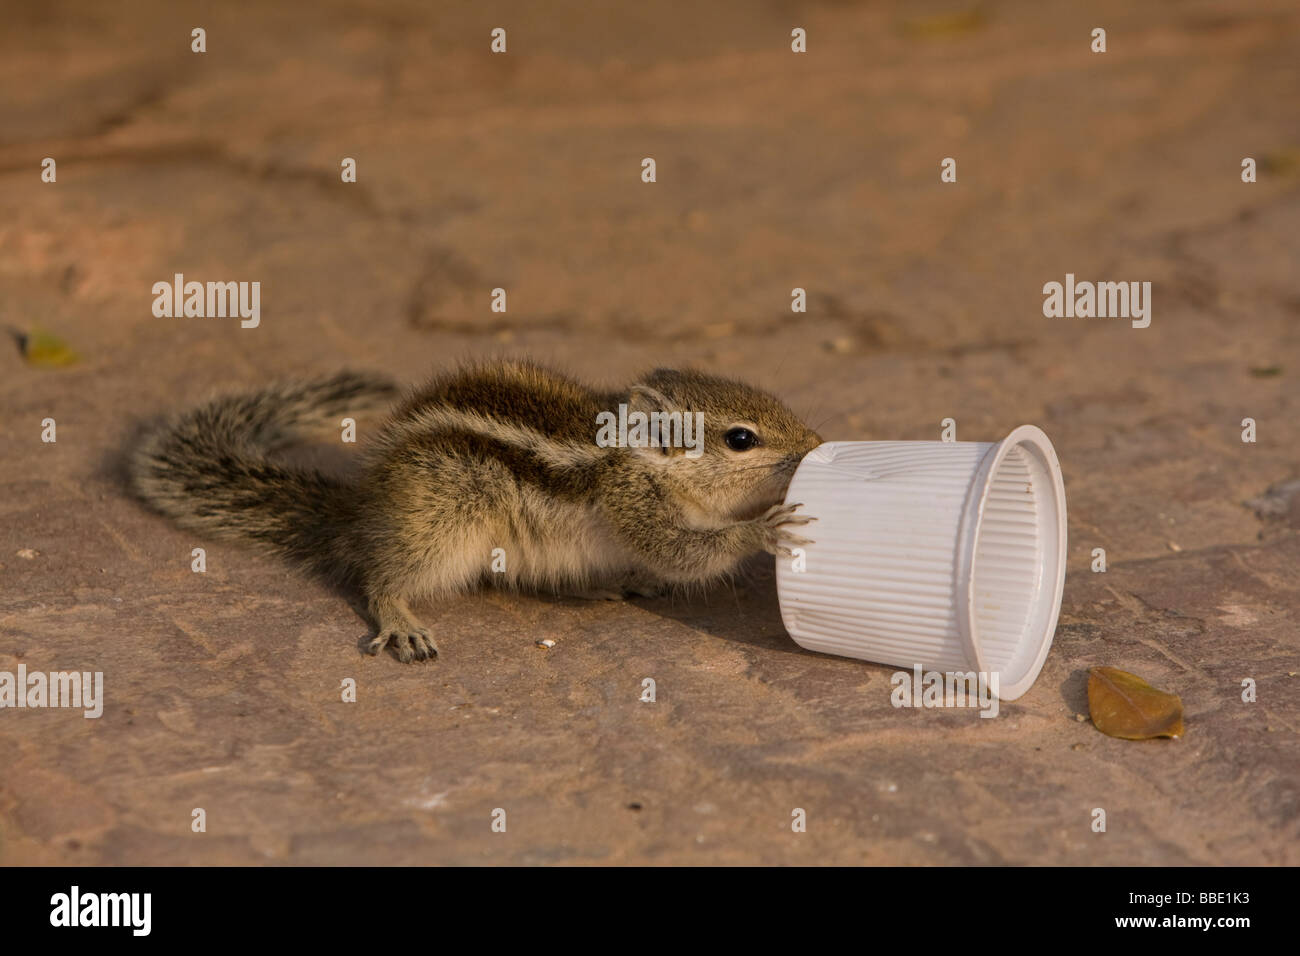 Young Three striped Ground Squirrel Tamias striatus biting through side of plastic cup, Rajasthan, India Stock Photo